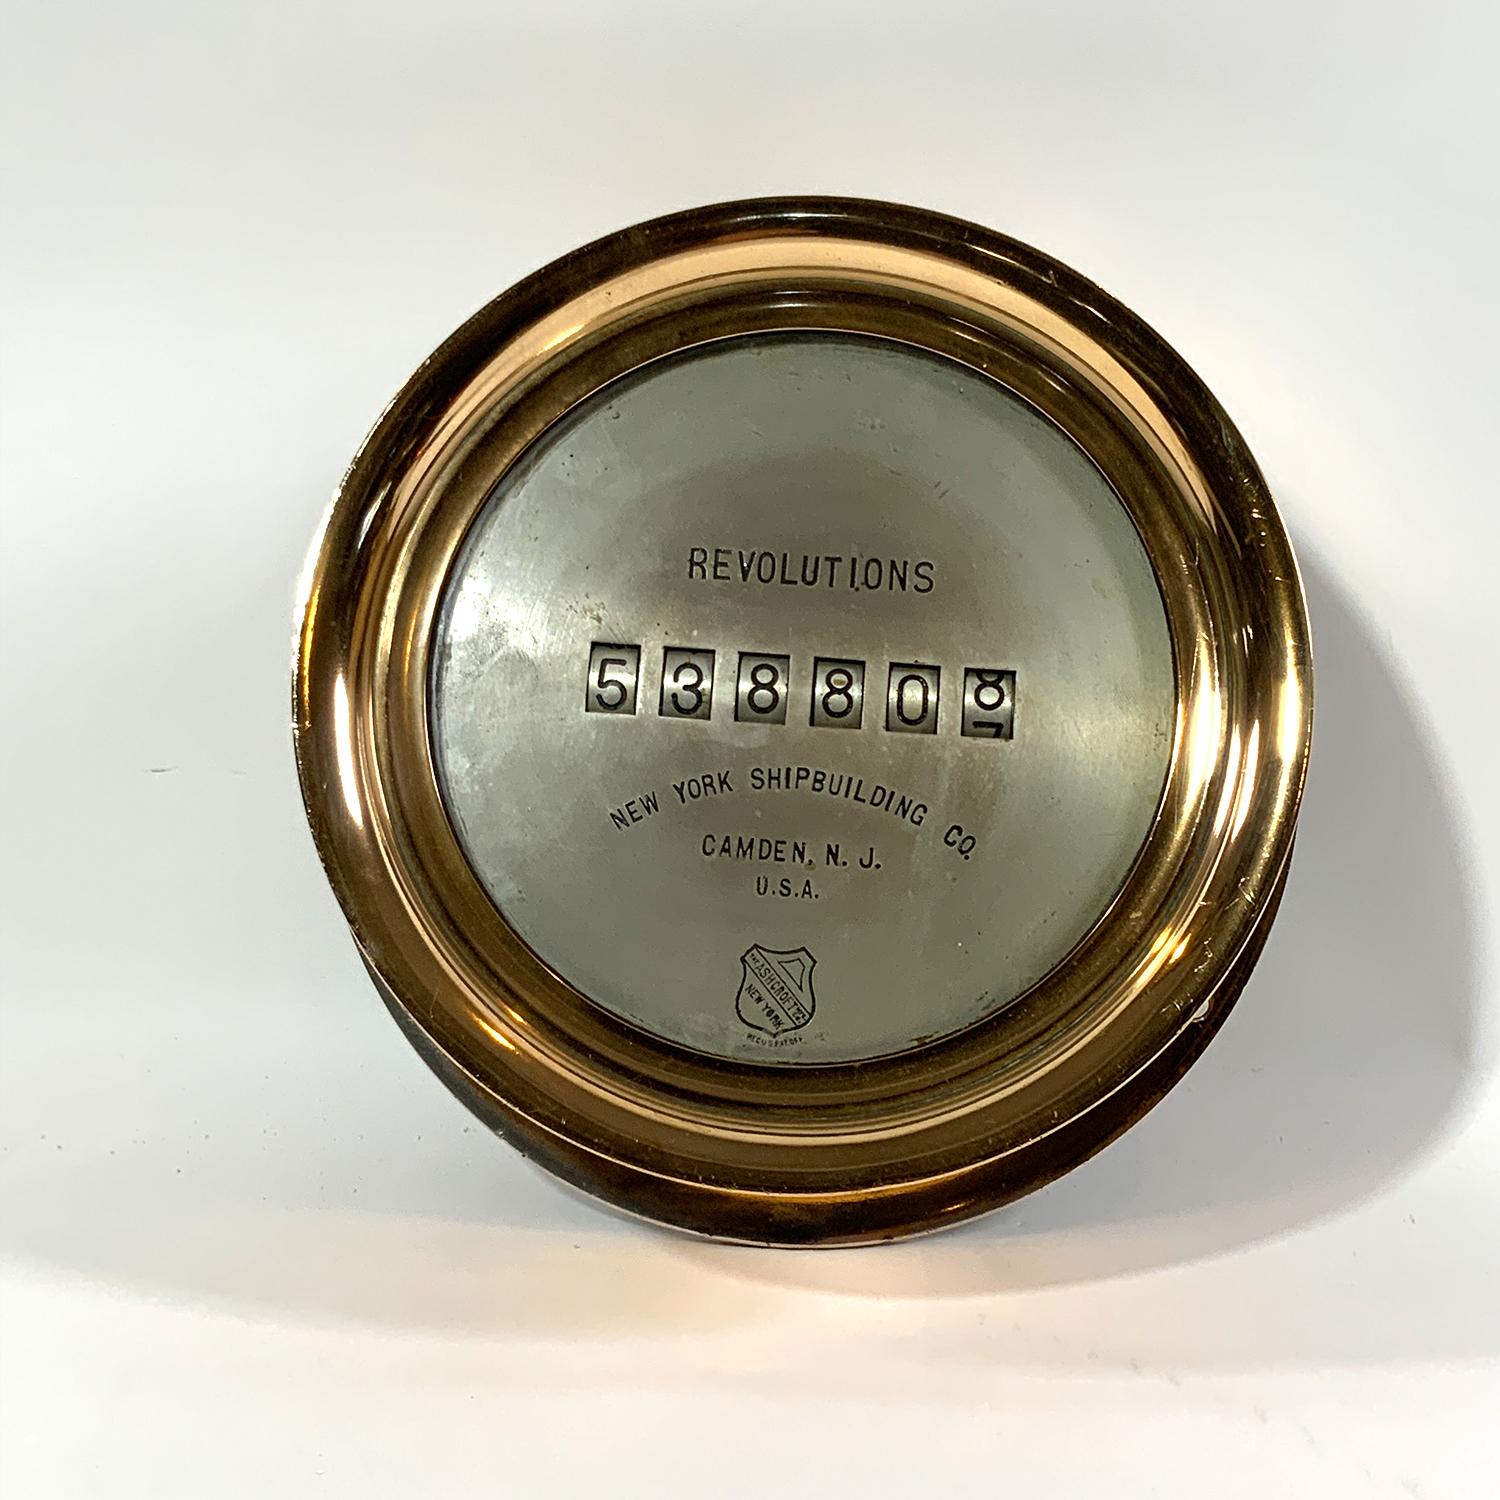 Ships Revolution Counter by Ashcroft Mfg. Co New York. 8 inch face inscribed New York Ship building Co. Camden, N.J. USA. Nickel plated over brass with nickel or silvered face. Overall 10 3/4 diameter x 4 inches tall. Weight 12 pounds. Hinged face